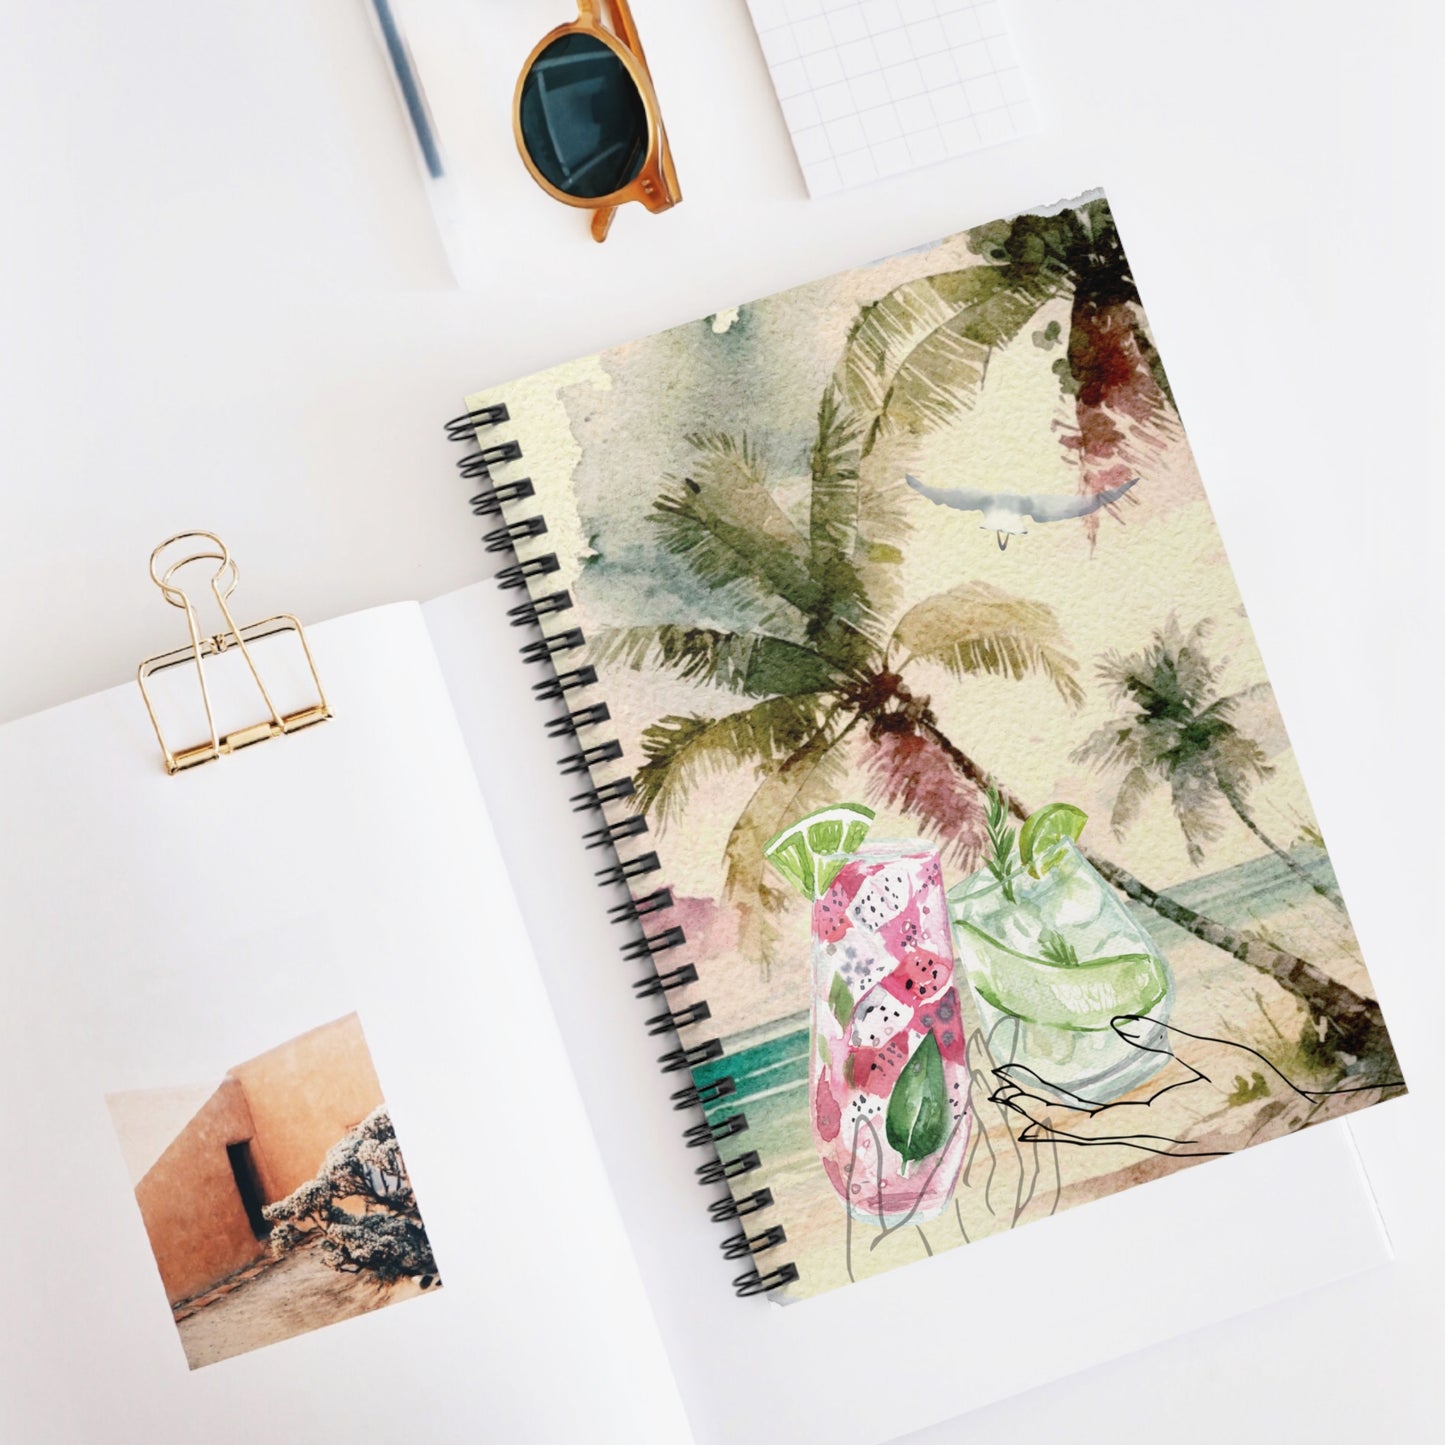 Watercolor Paradise: Spiral Notebook - Log Books - Journals - Diaries - and More Custom Printed by TheGlassyLass